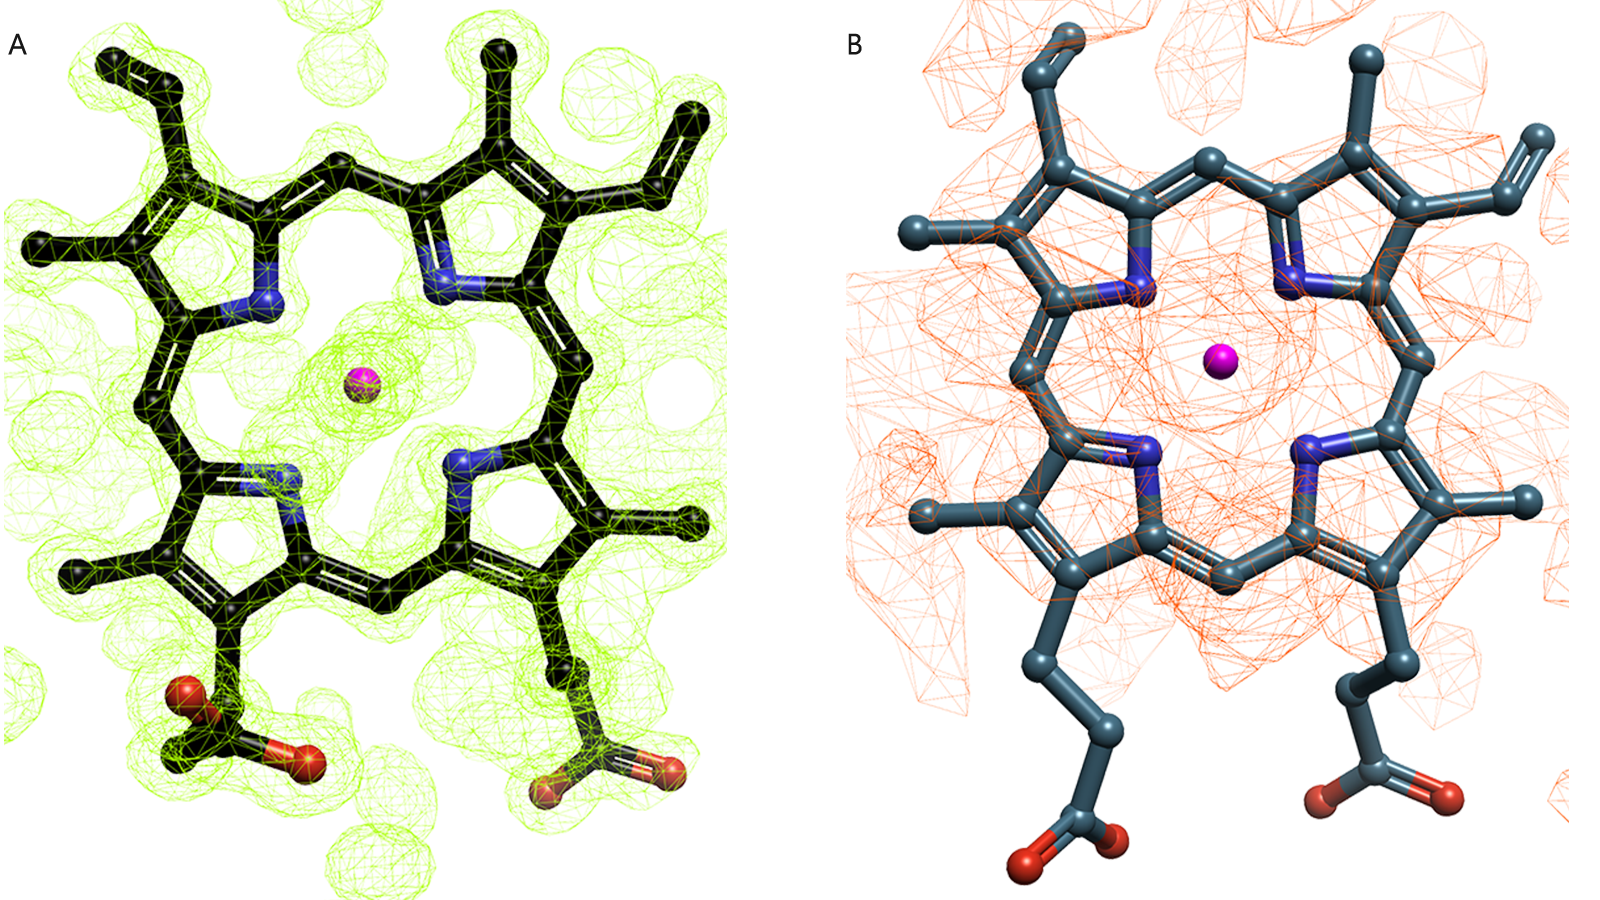 Figure 1. Example of protein structures with good (green surface) and poor (red surface) electron density maps for the same target